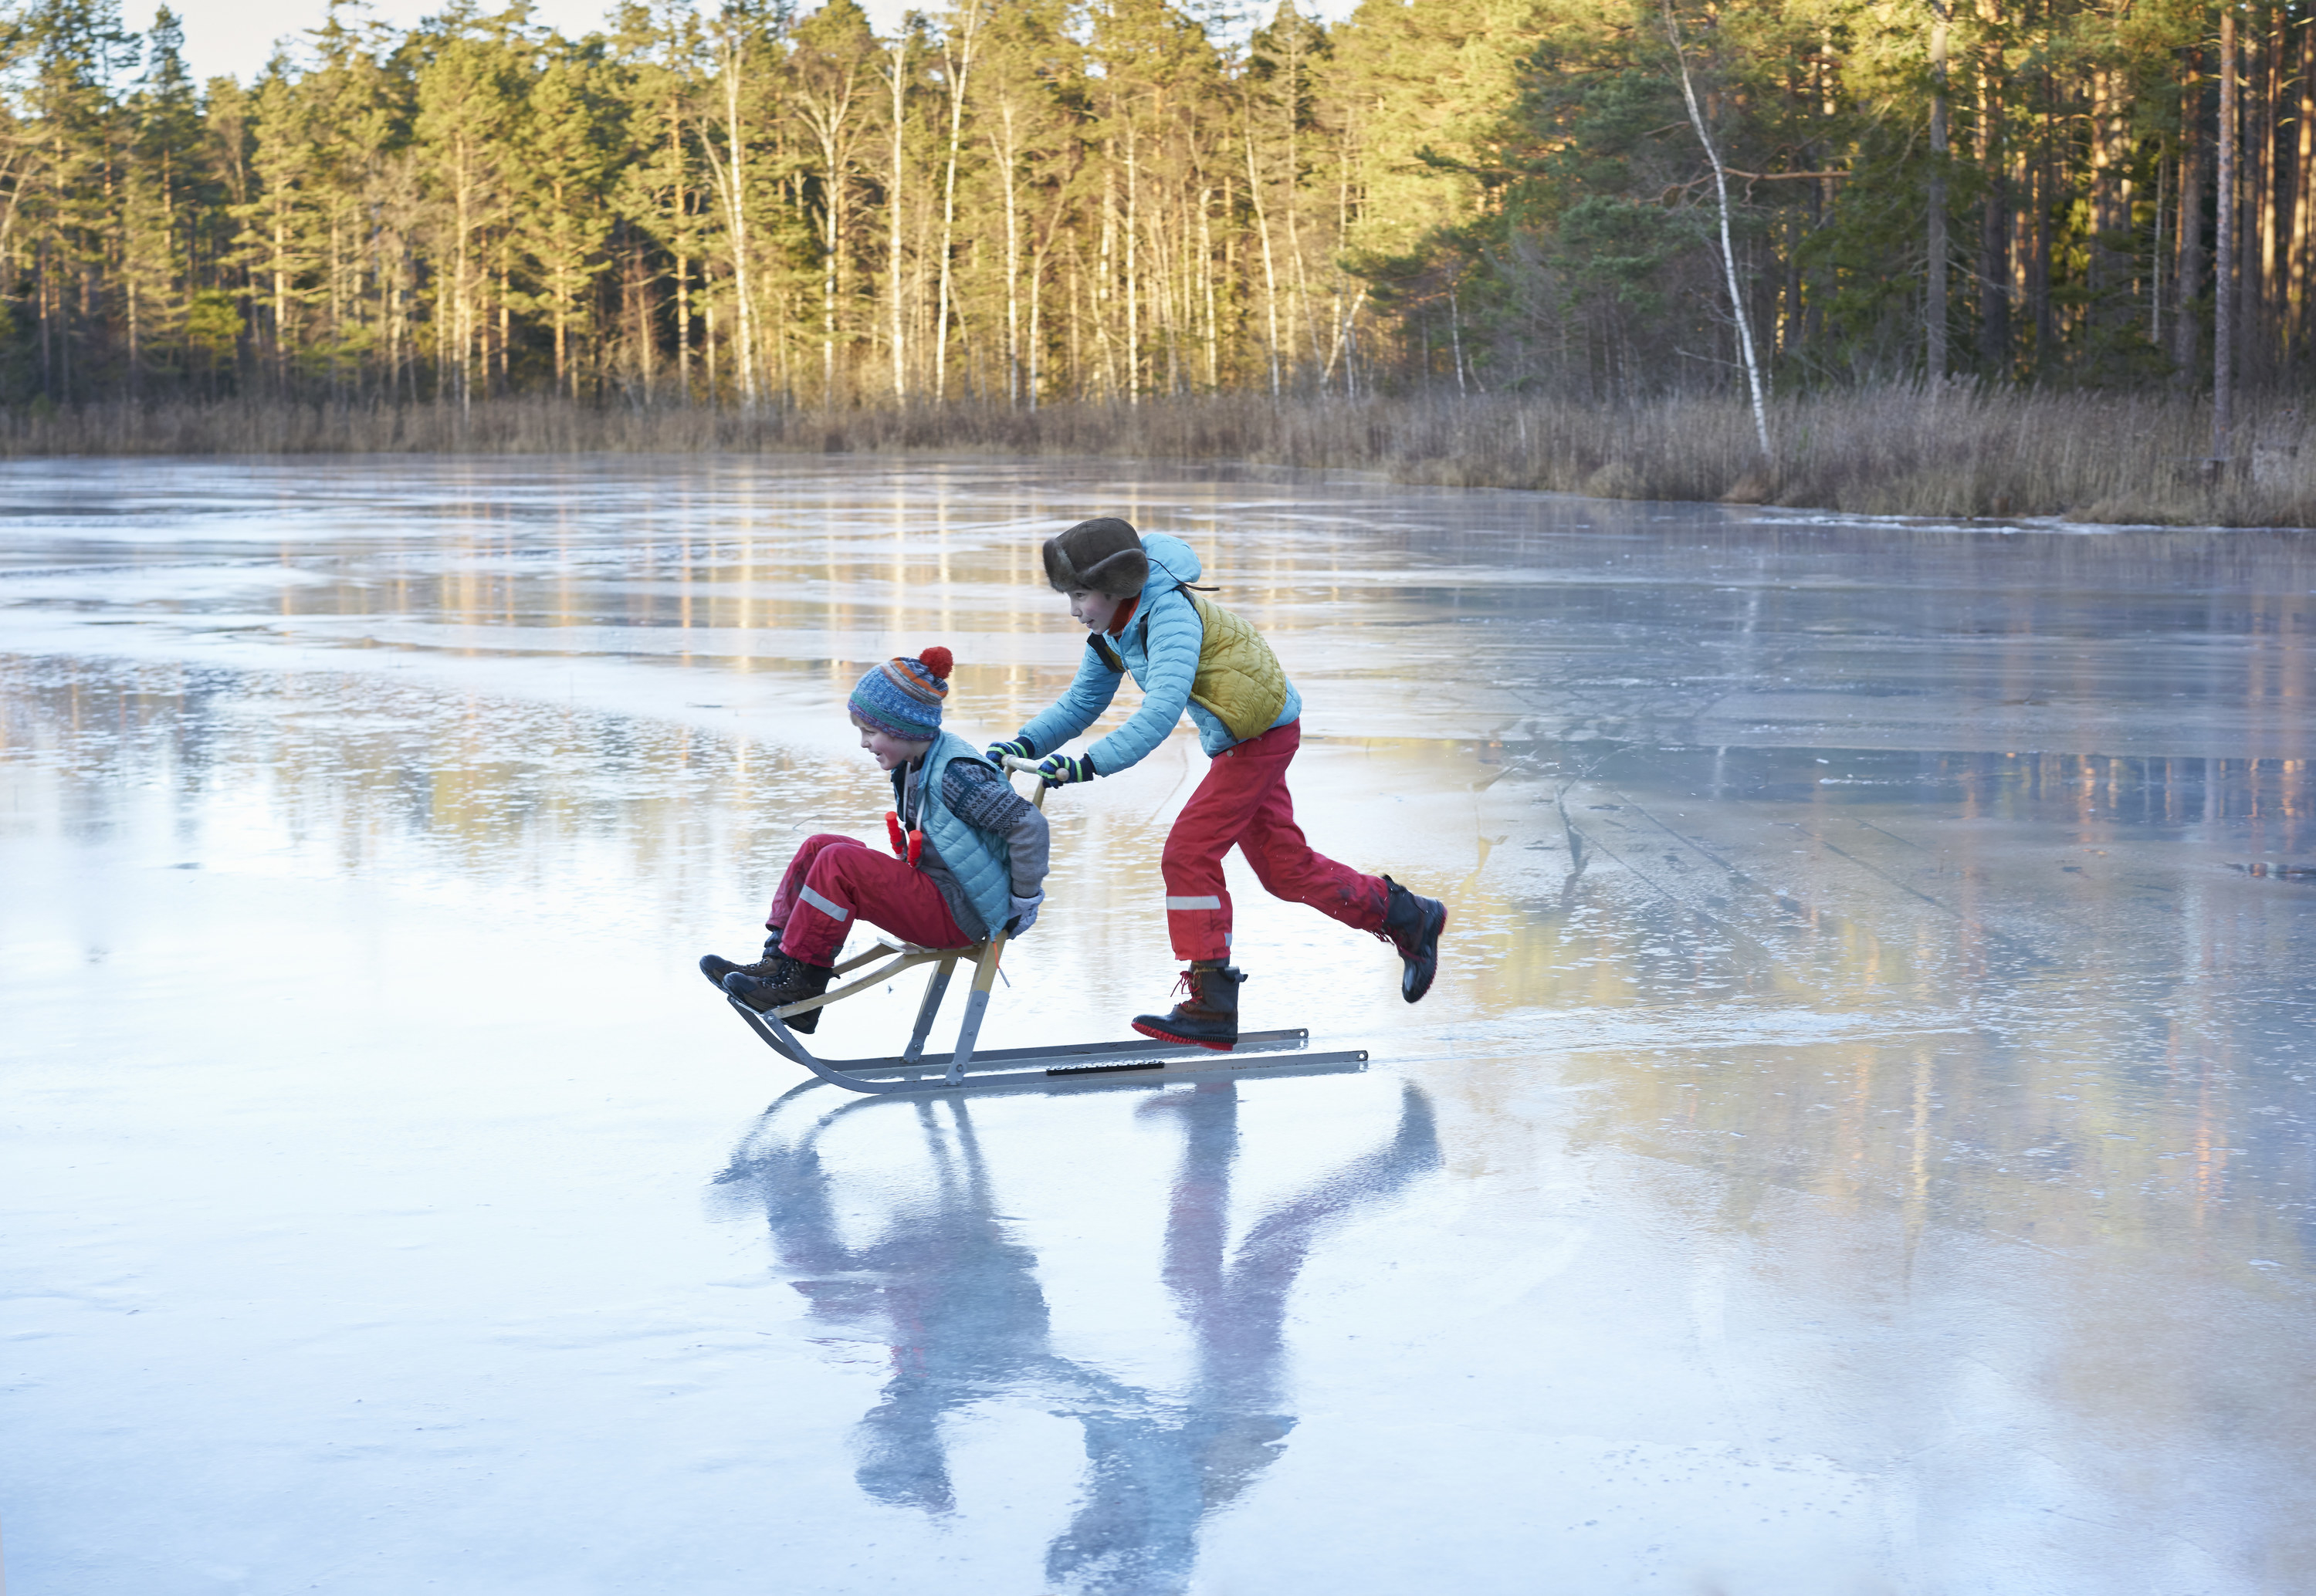 one kid pushing another on a sled/skate across a frozen water